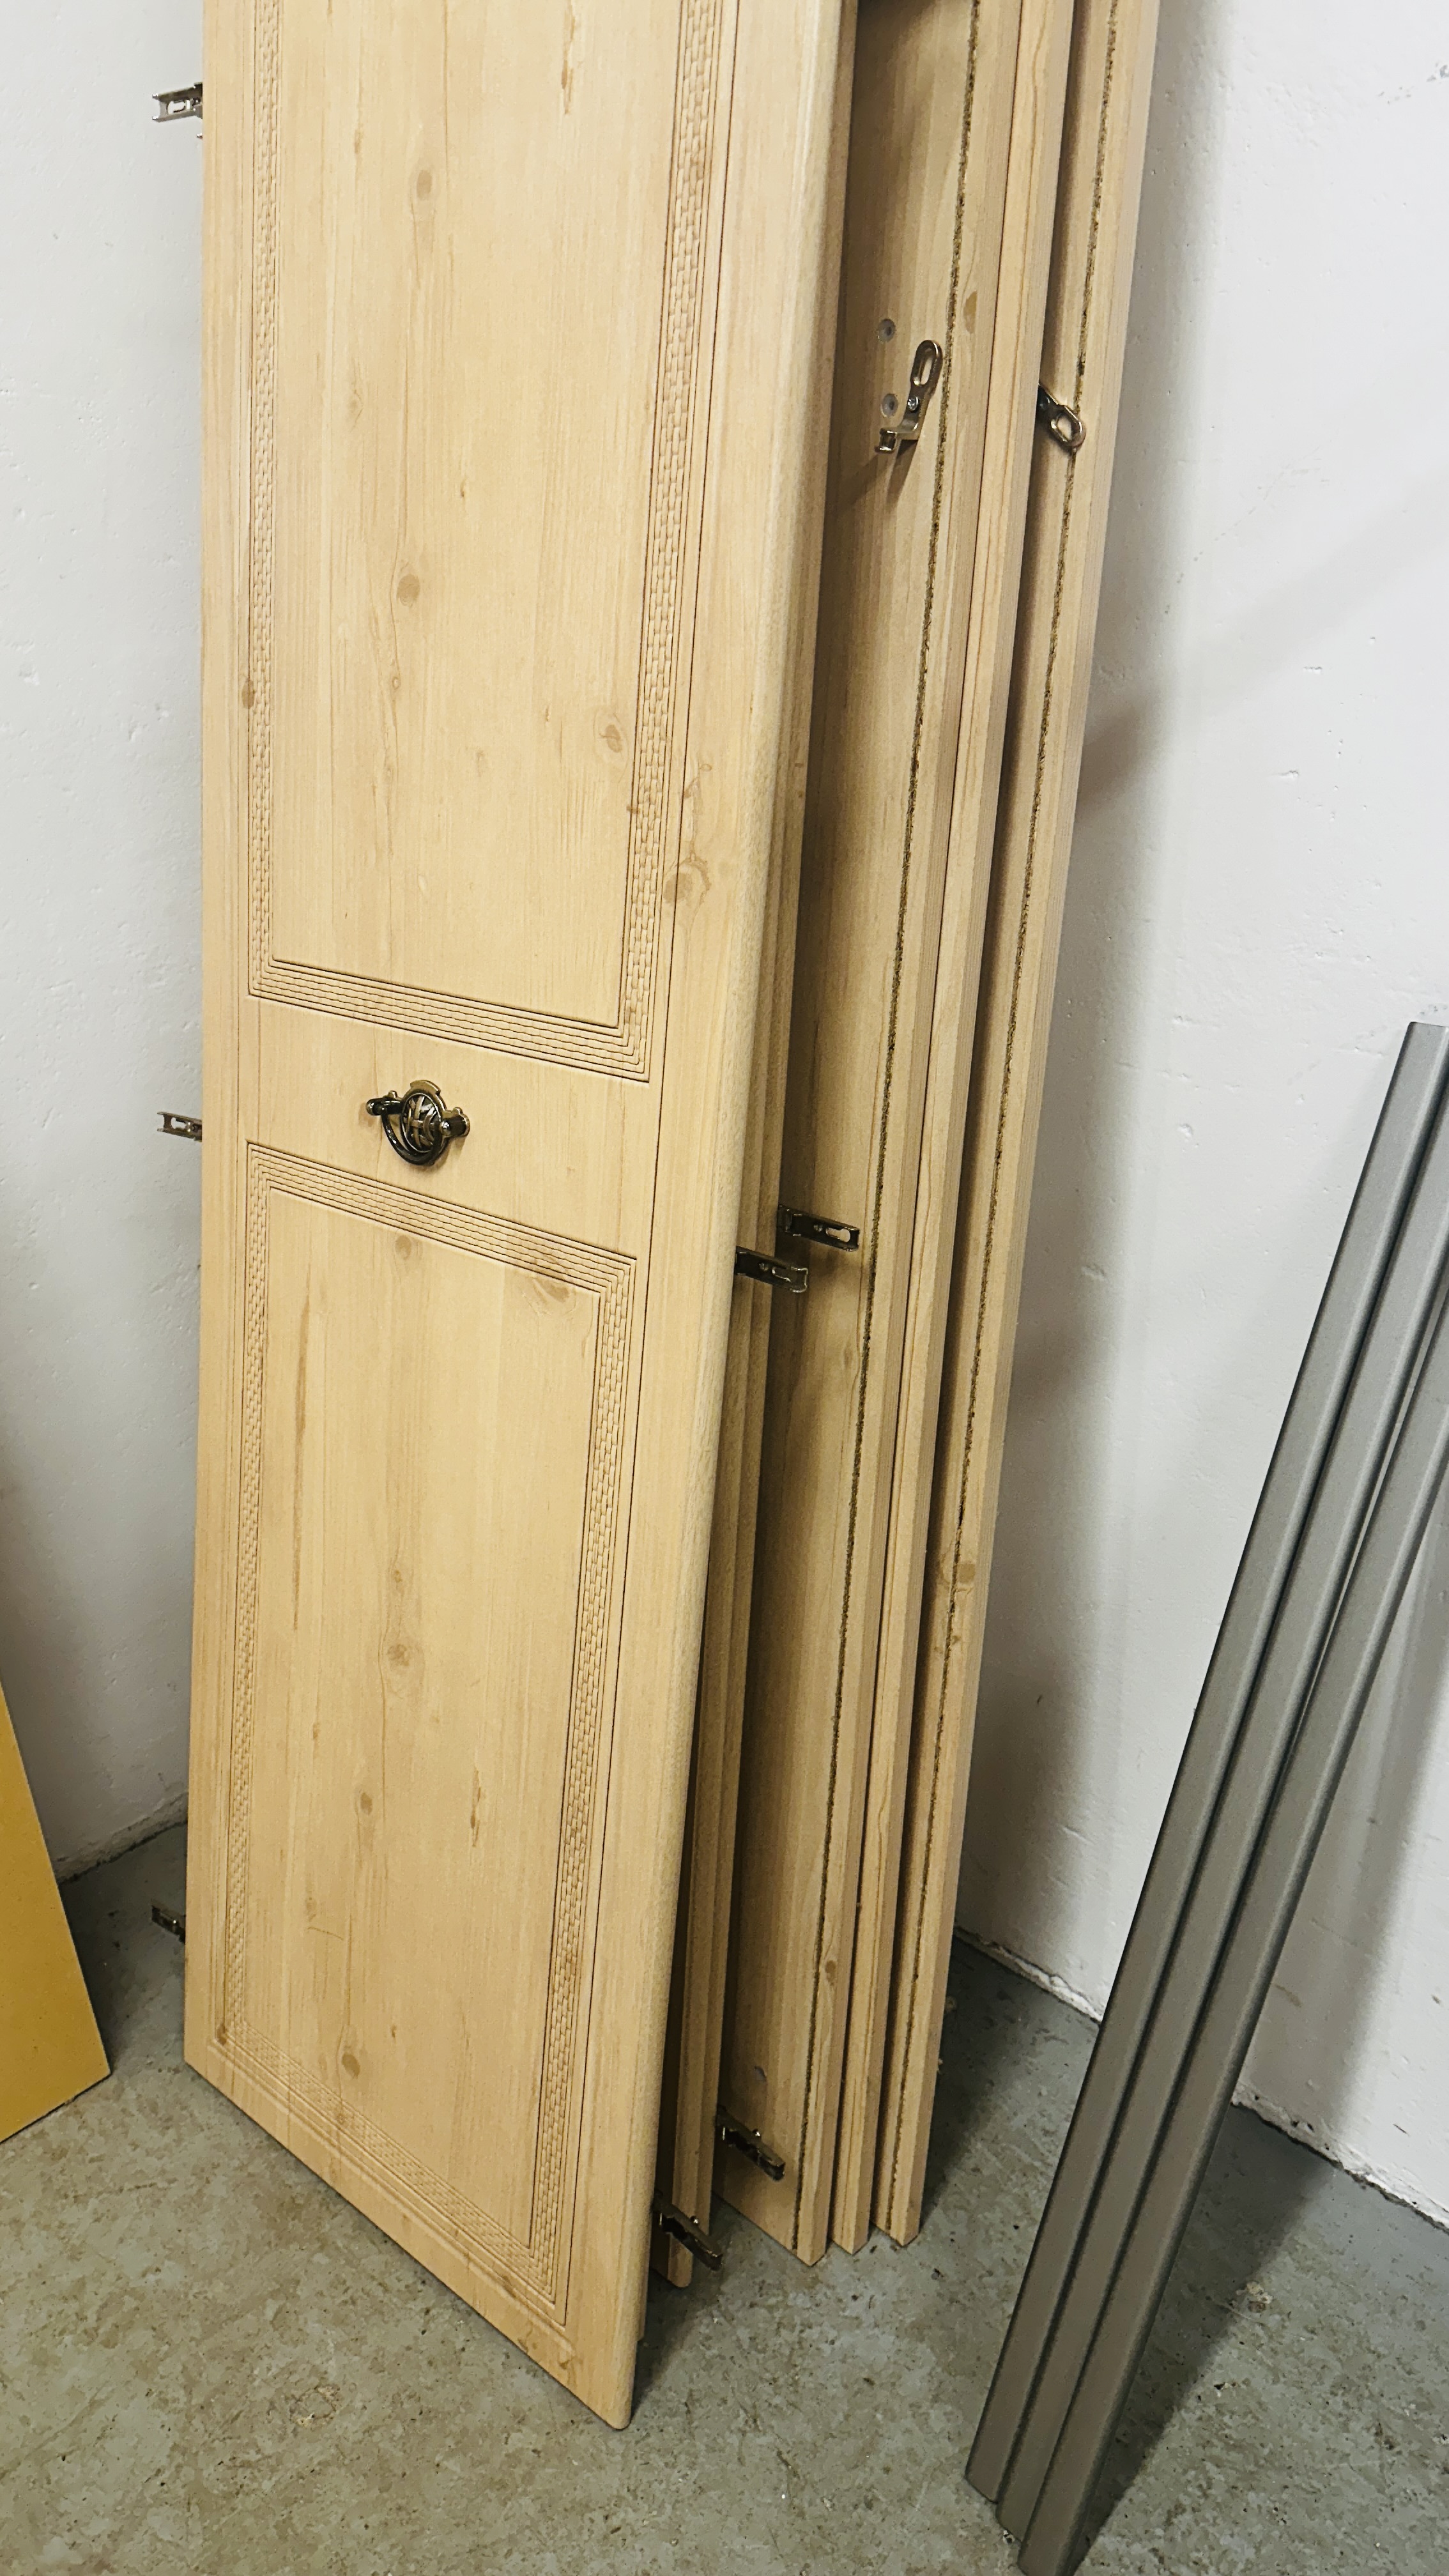 AN ALSTONS OYSTER BAY MODERN LIMED FINISH FOUR DOOR WARDROBE (FLATPACKED) - APPROX 184CM WIDE. - Image 3 of 3